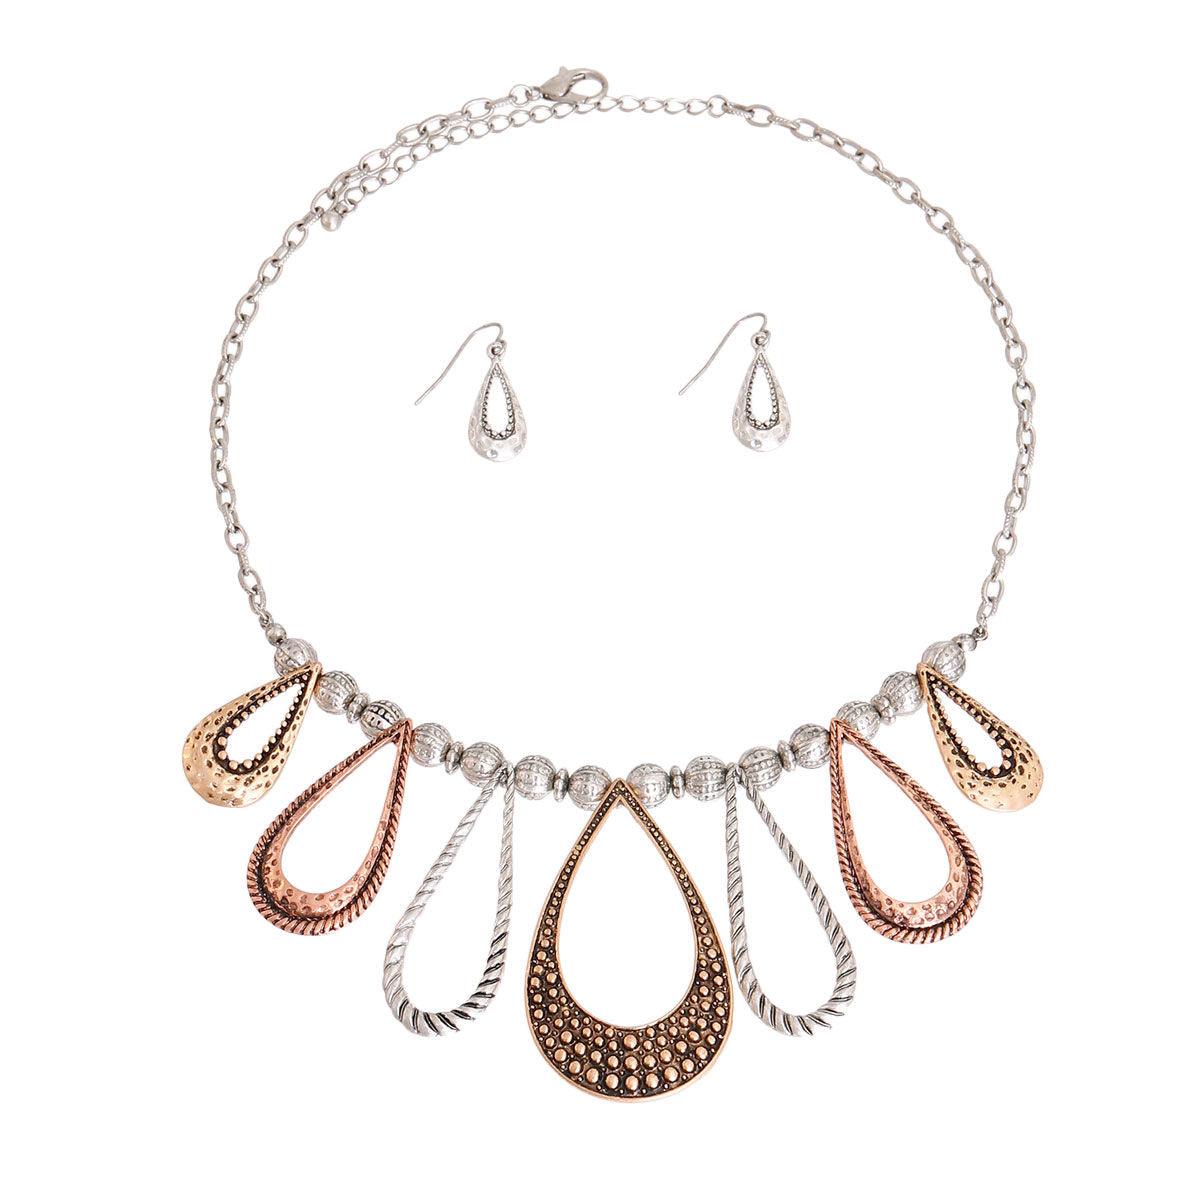 Stylish Tear Droplet Necklace Set in Multiple Tones